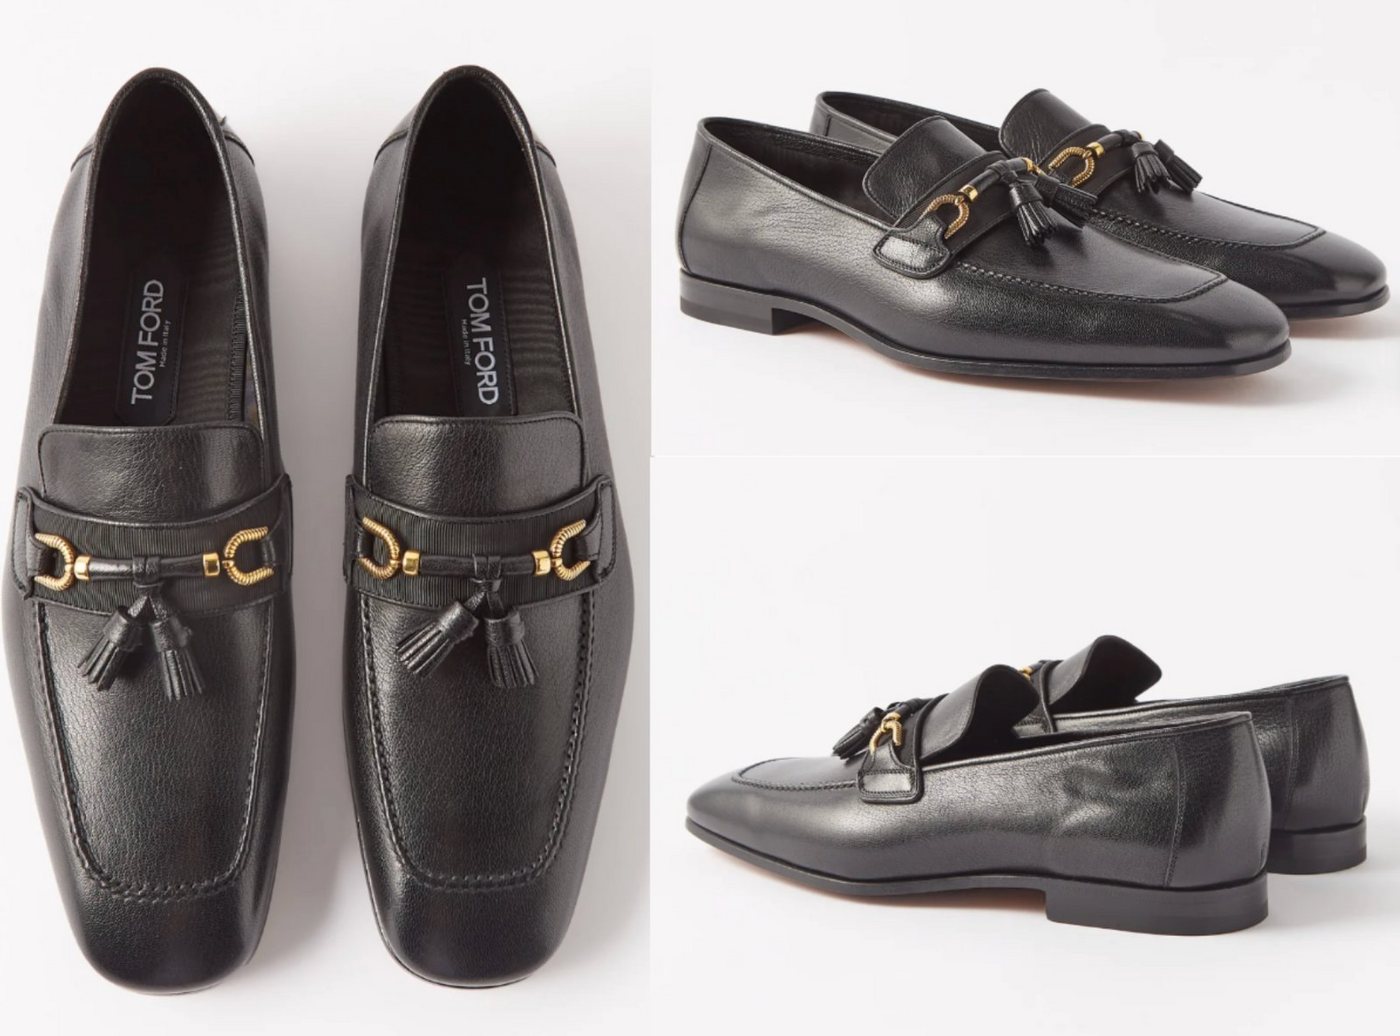 Tom Ford TOM FORD Tasselled Loafers Schuhe Sneakers Shoes Mokassins Grained Cal Sneaker von Tom Ford